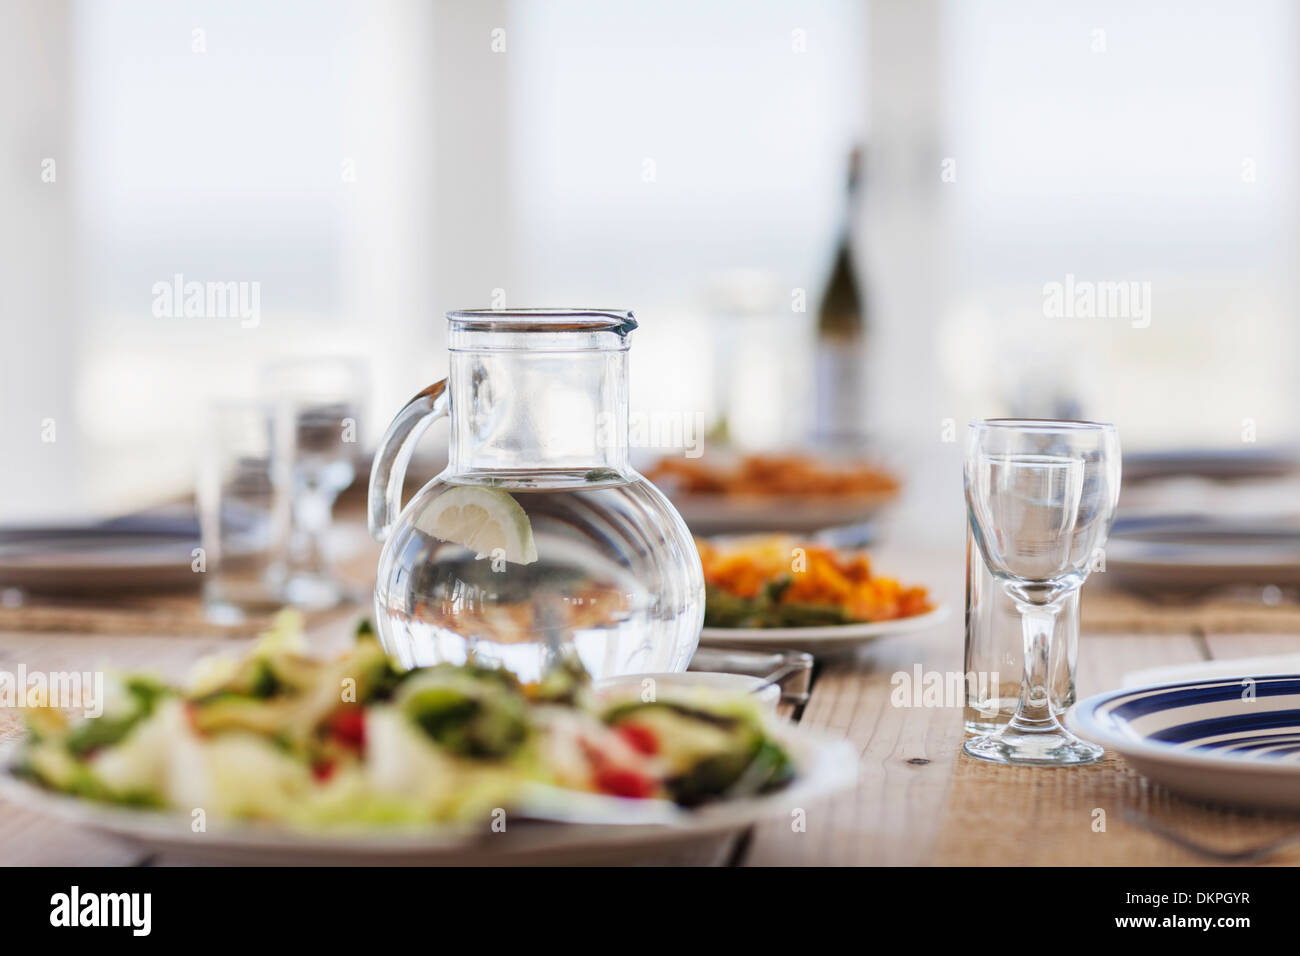 Food and water on set table Stock Photo